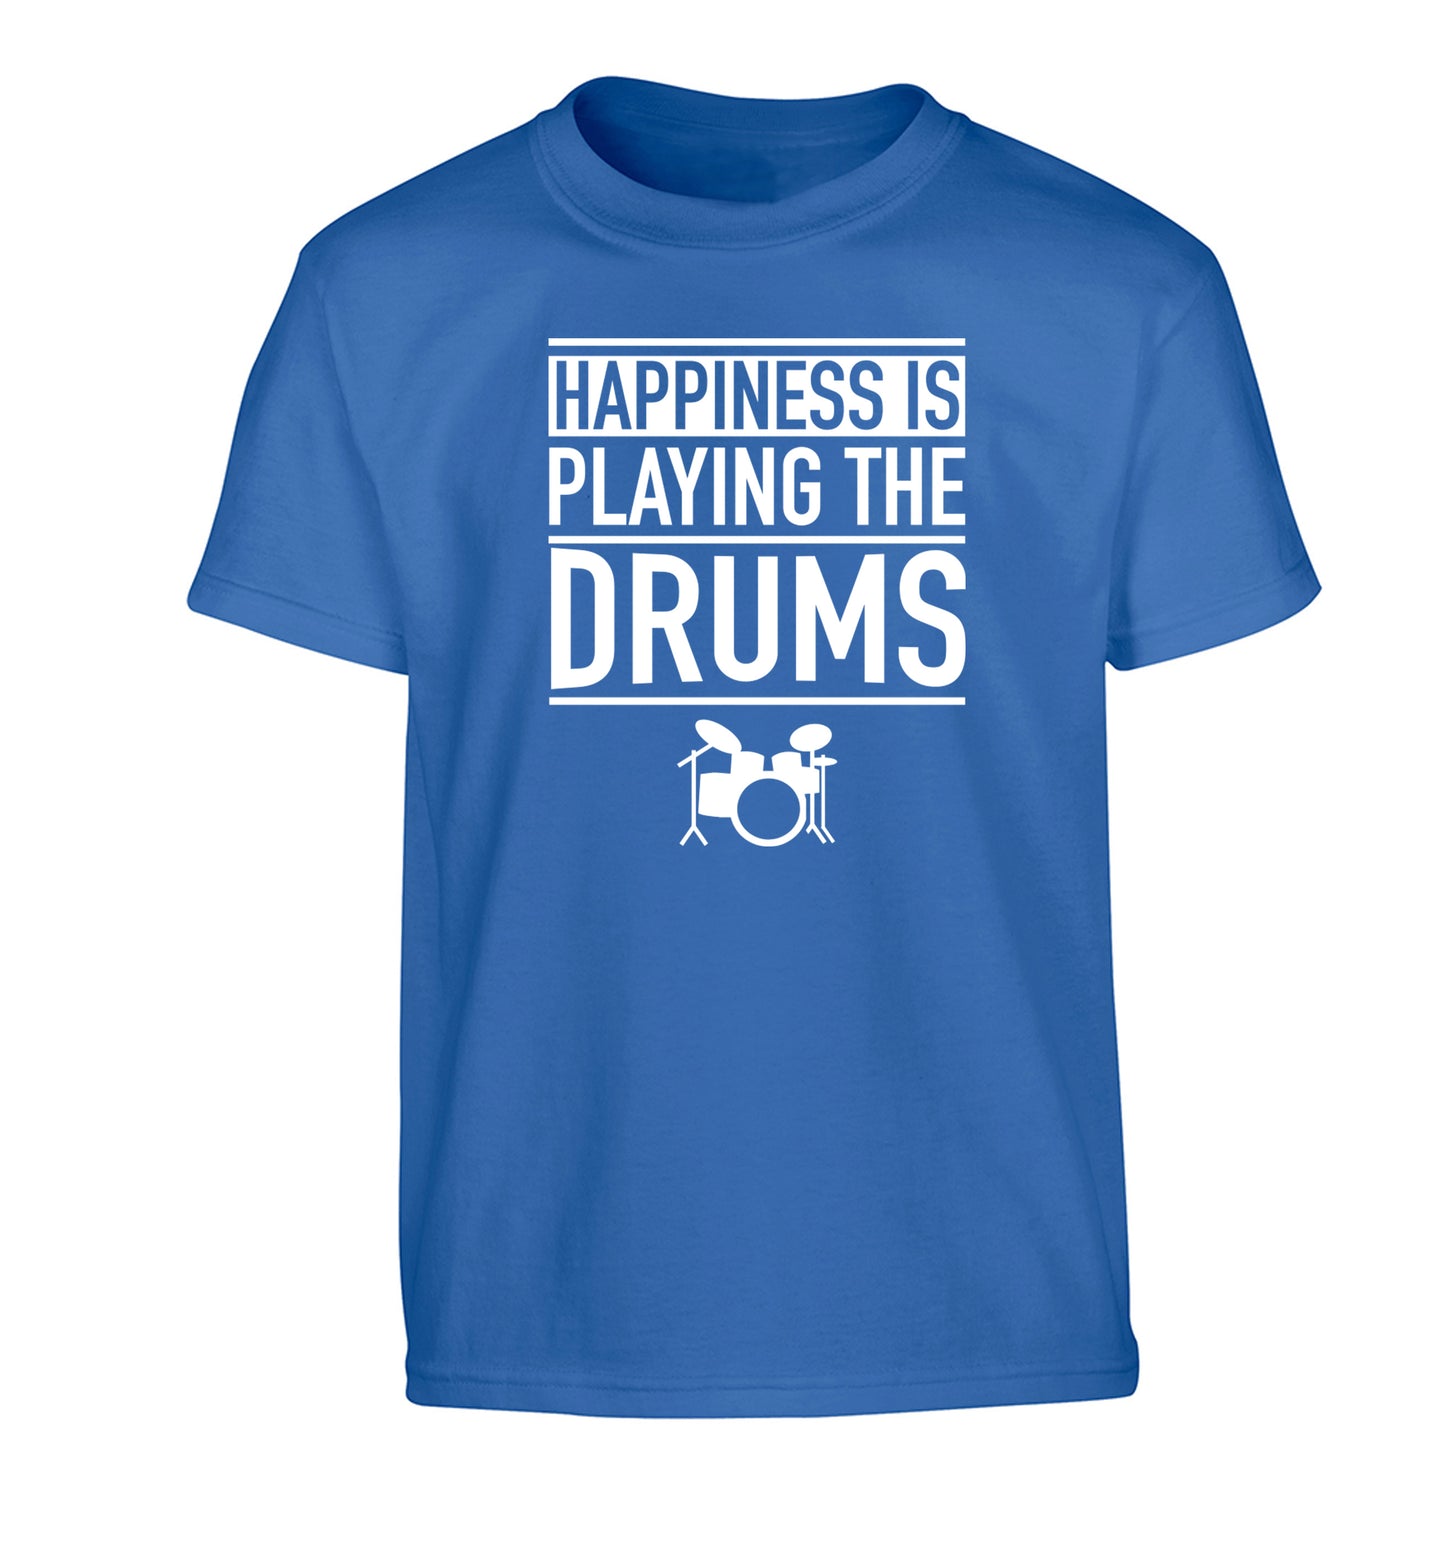 Happiness is playing the drums Children's blue Tshirt 12-14 Years